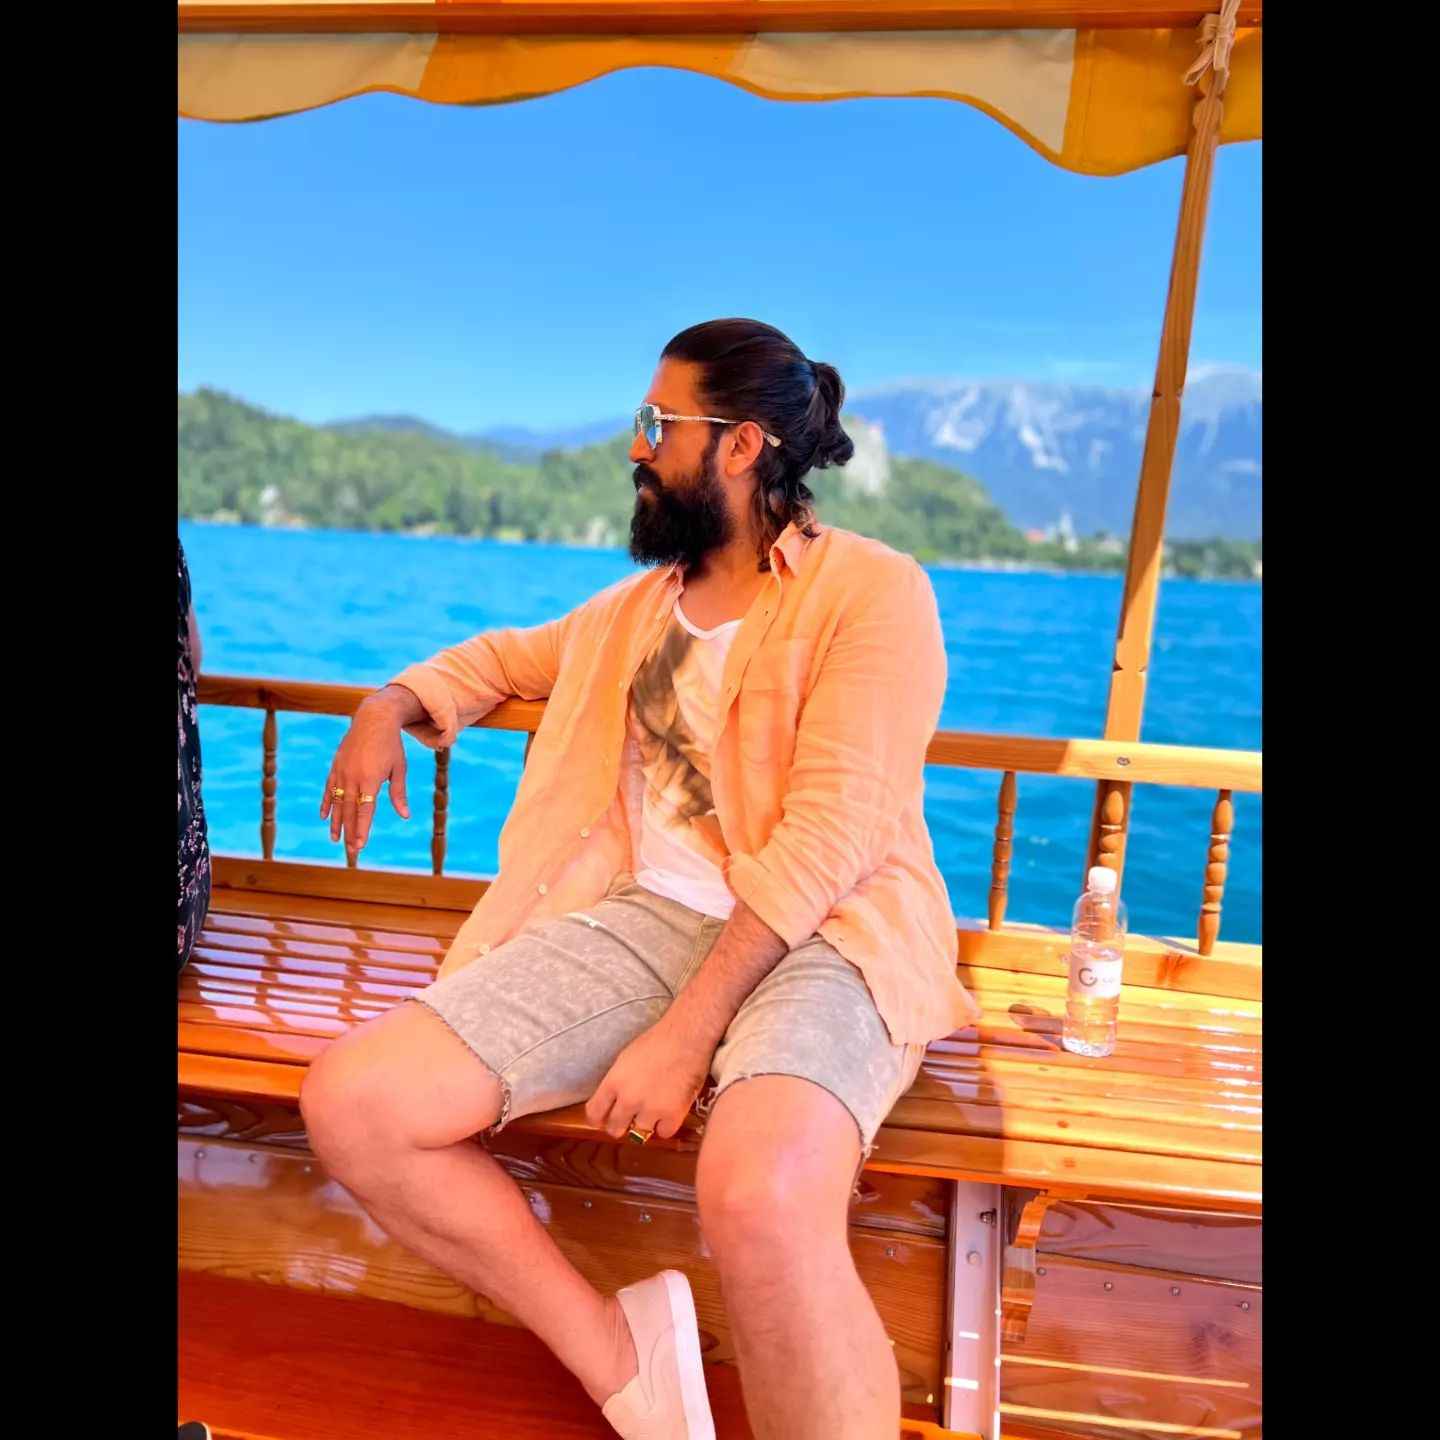 Radhika Pandit shares new romantic snaps with husband Yash, fans get 'couple goals'